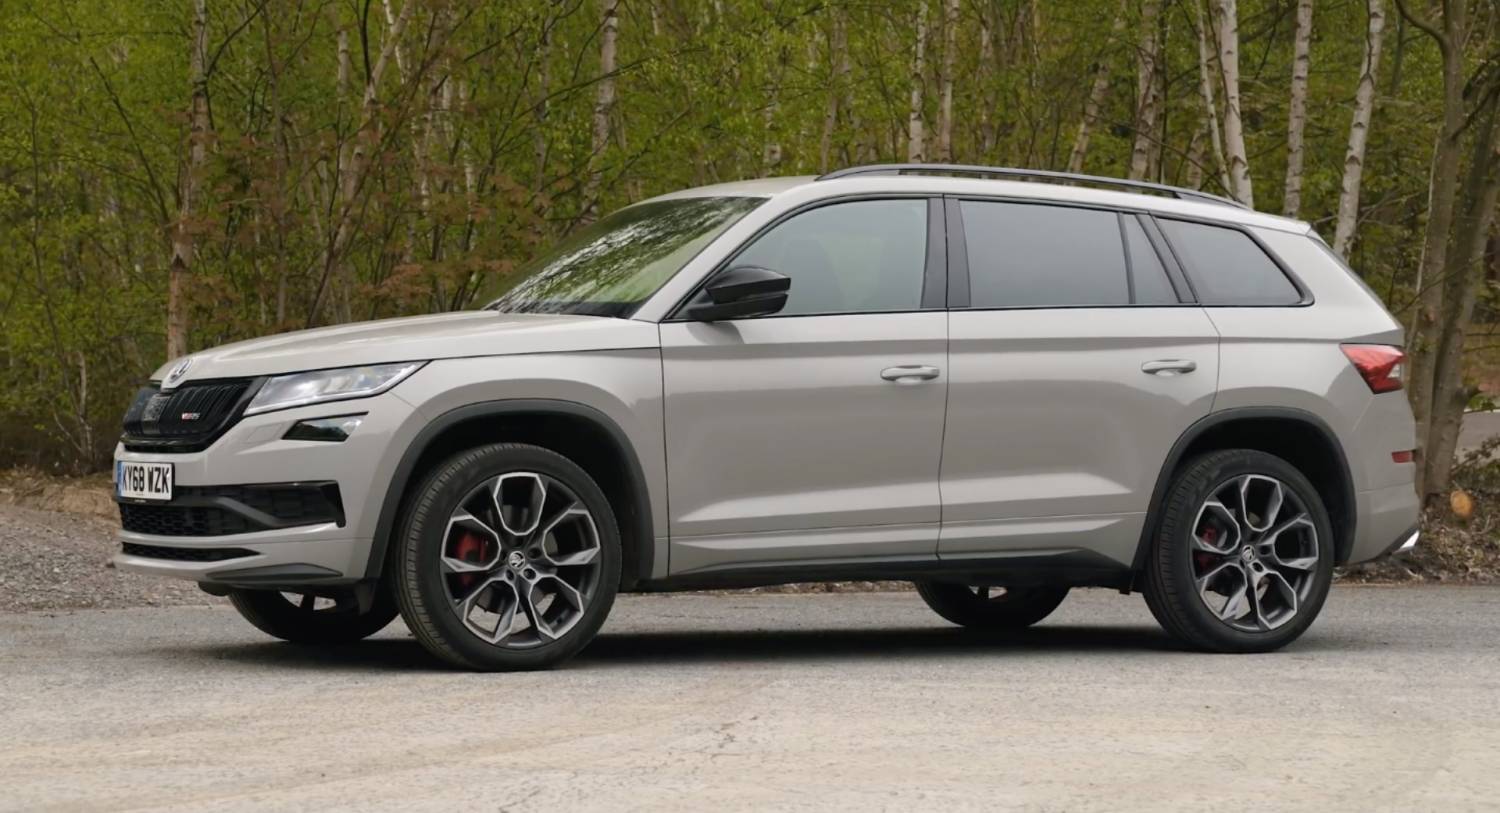 2020 Skoda Kodiaq Rs Is Aimed At A Rather Narrow Target Group Carscoops